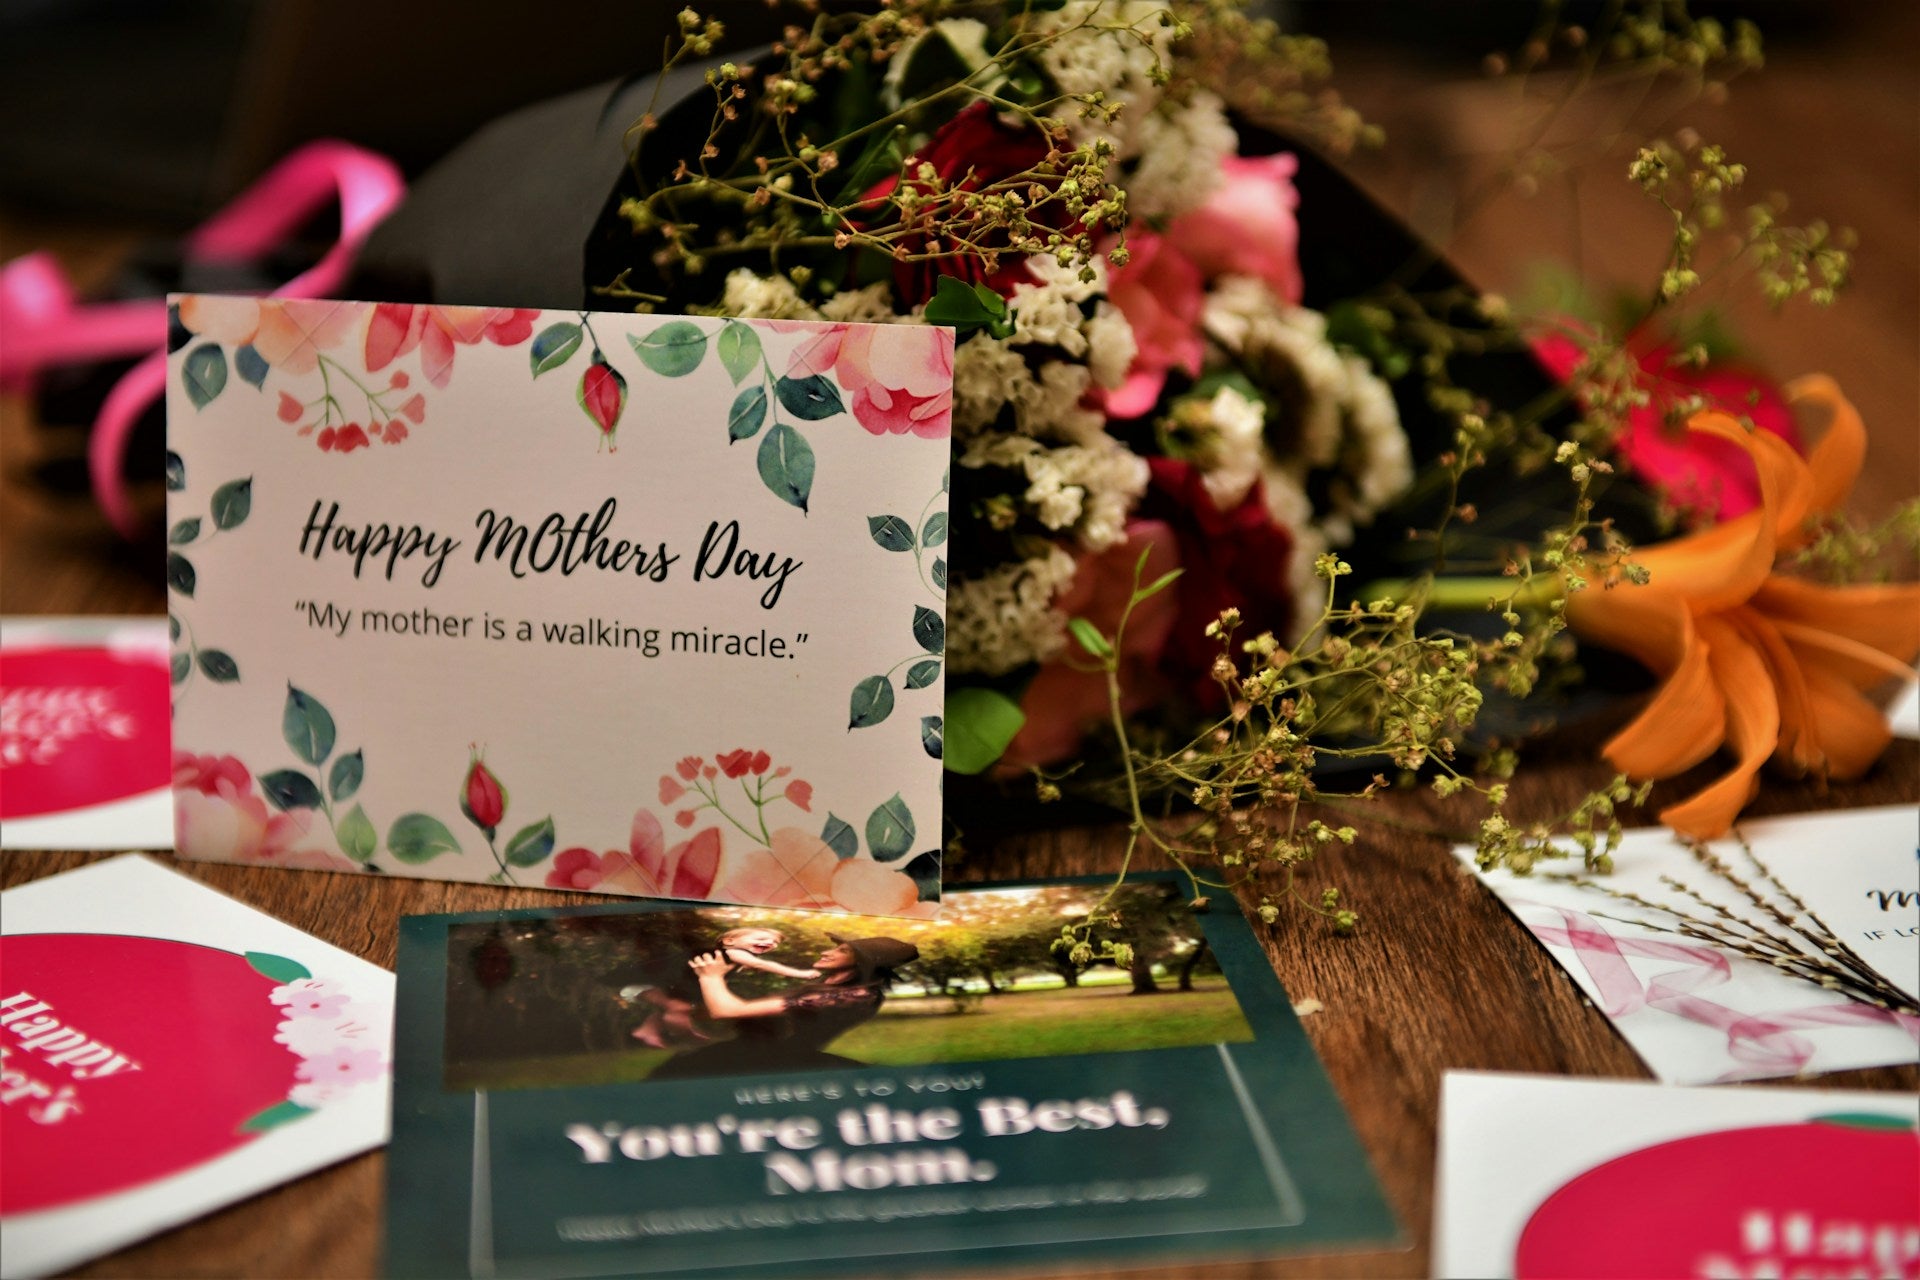 A Happy Mother's Day card and flowers on a table. 